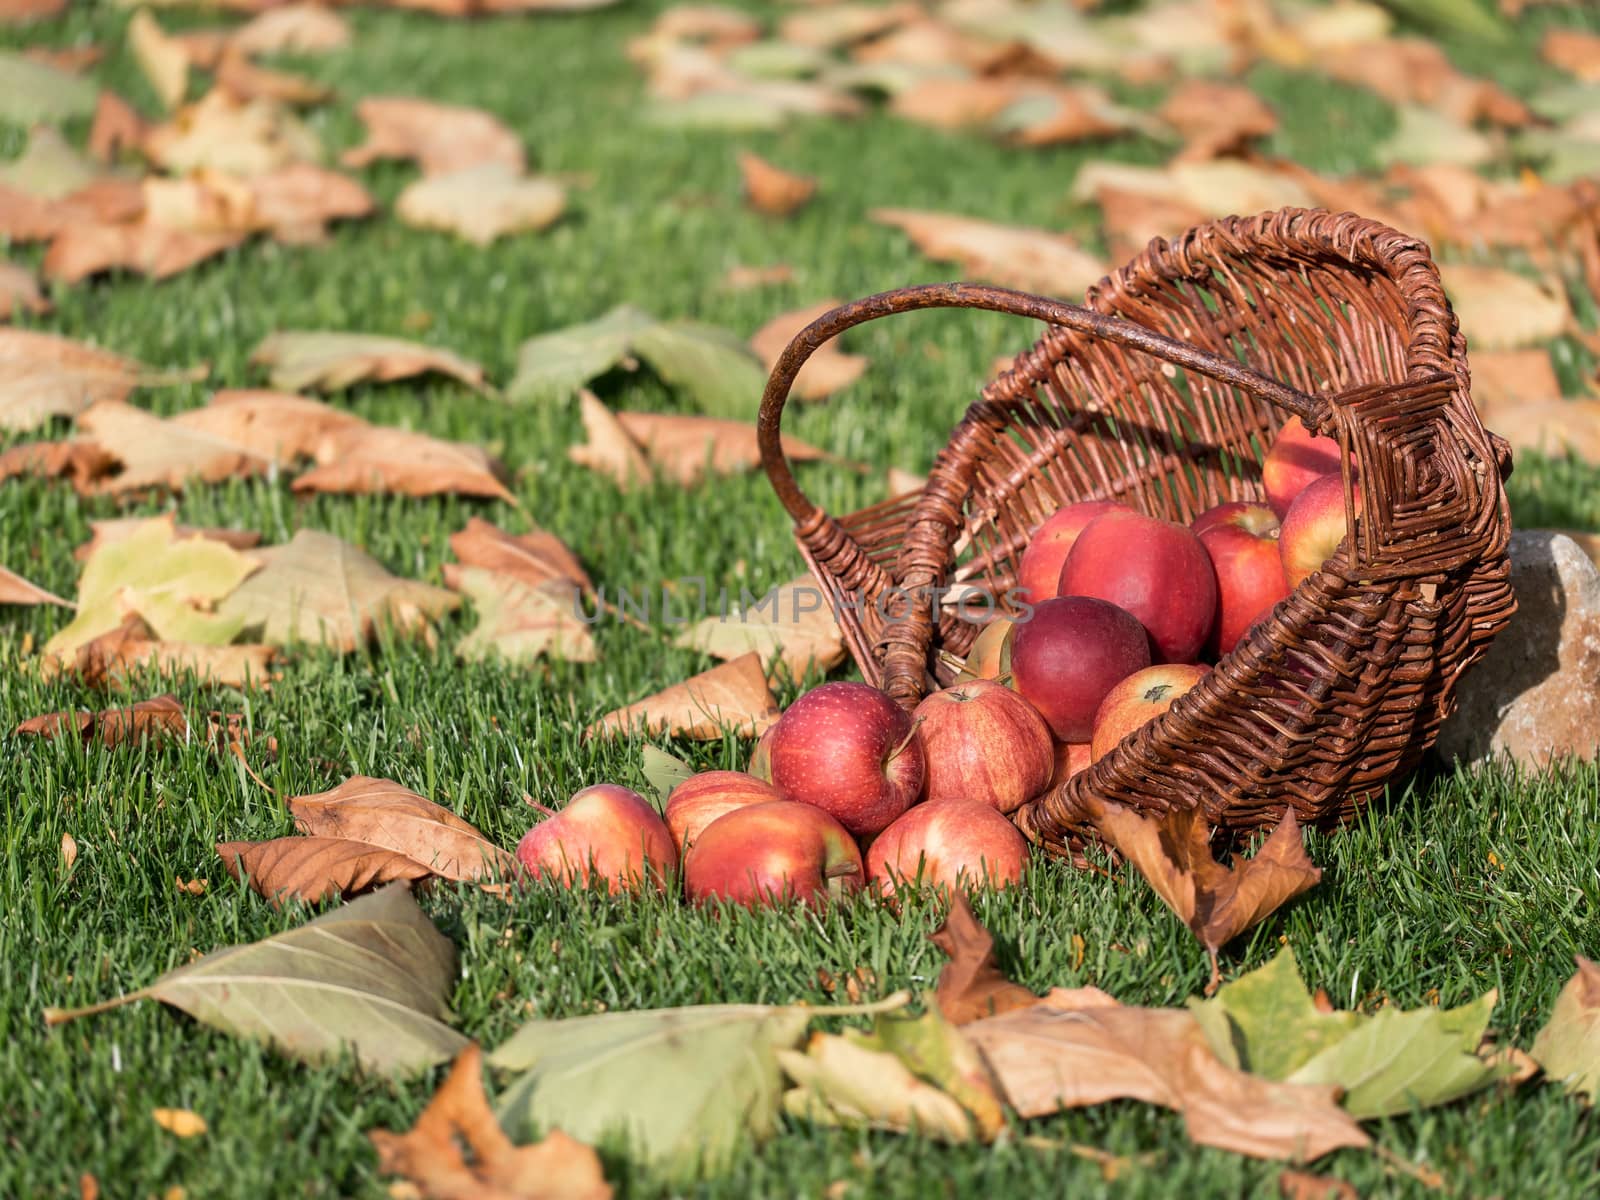 Wicker basket with red apples on a meadow with autumn leaves.